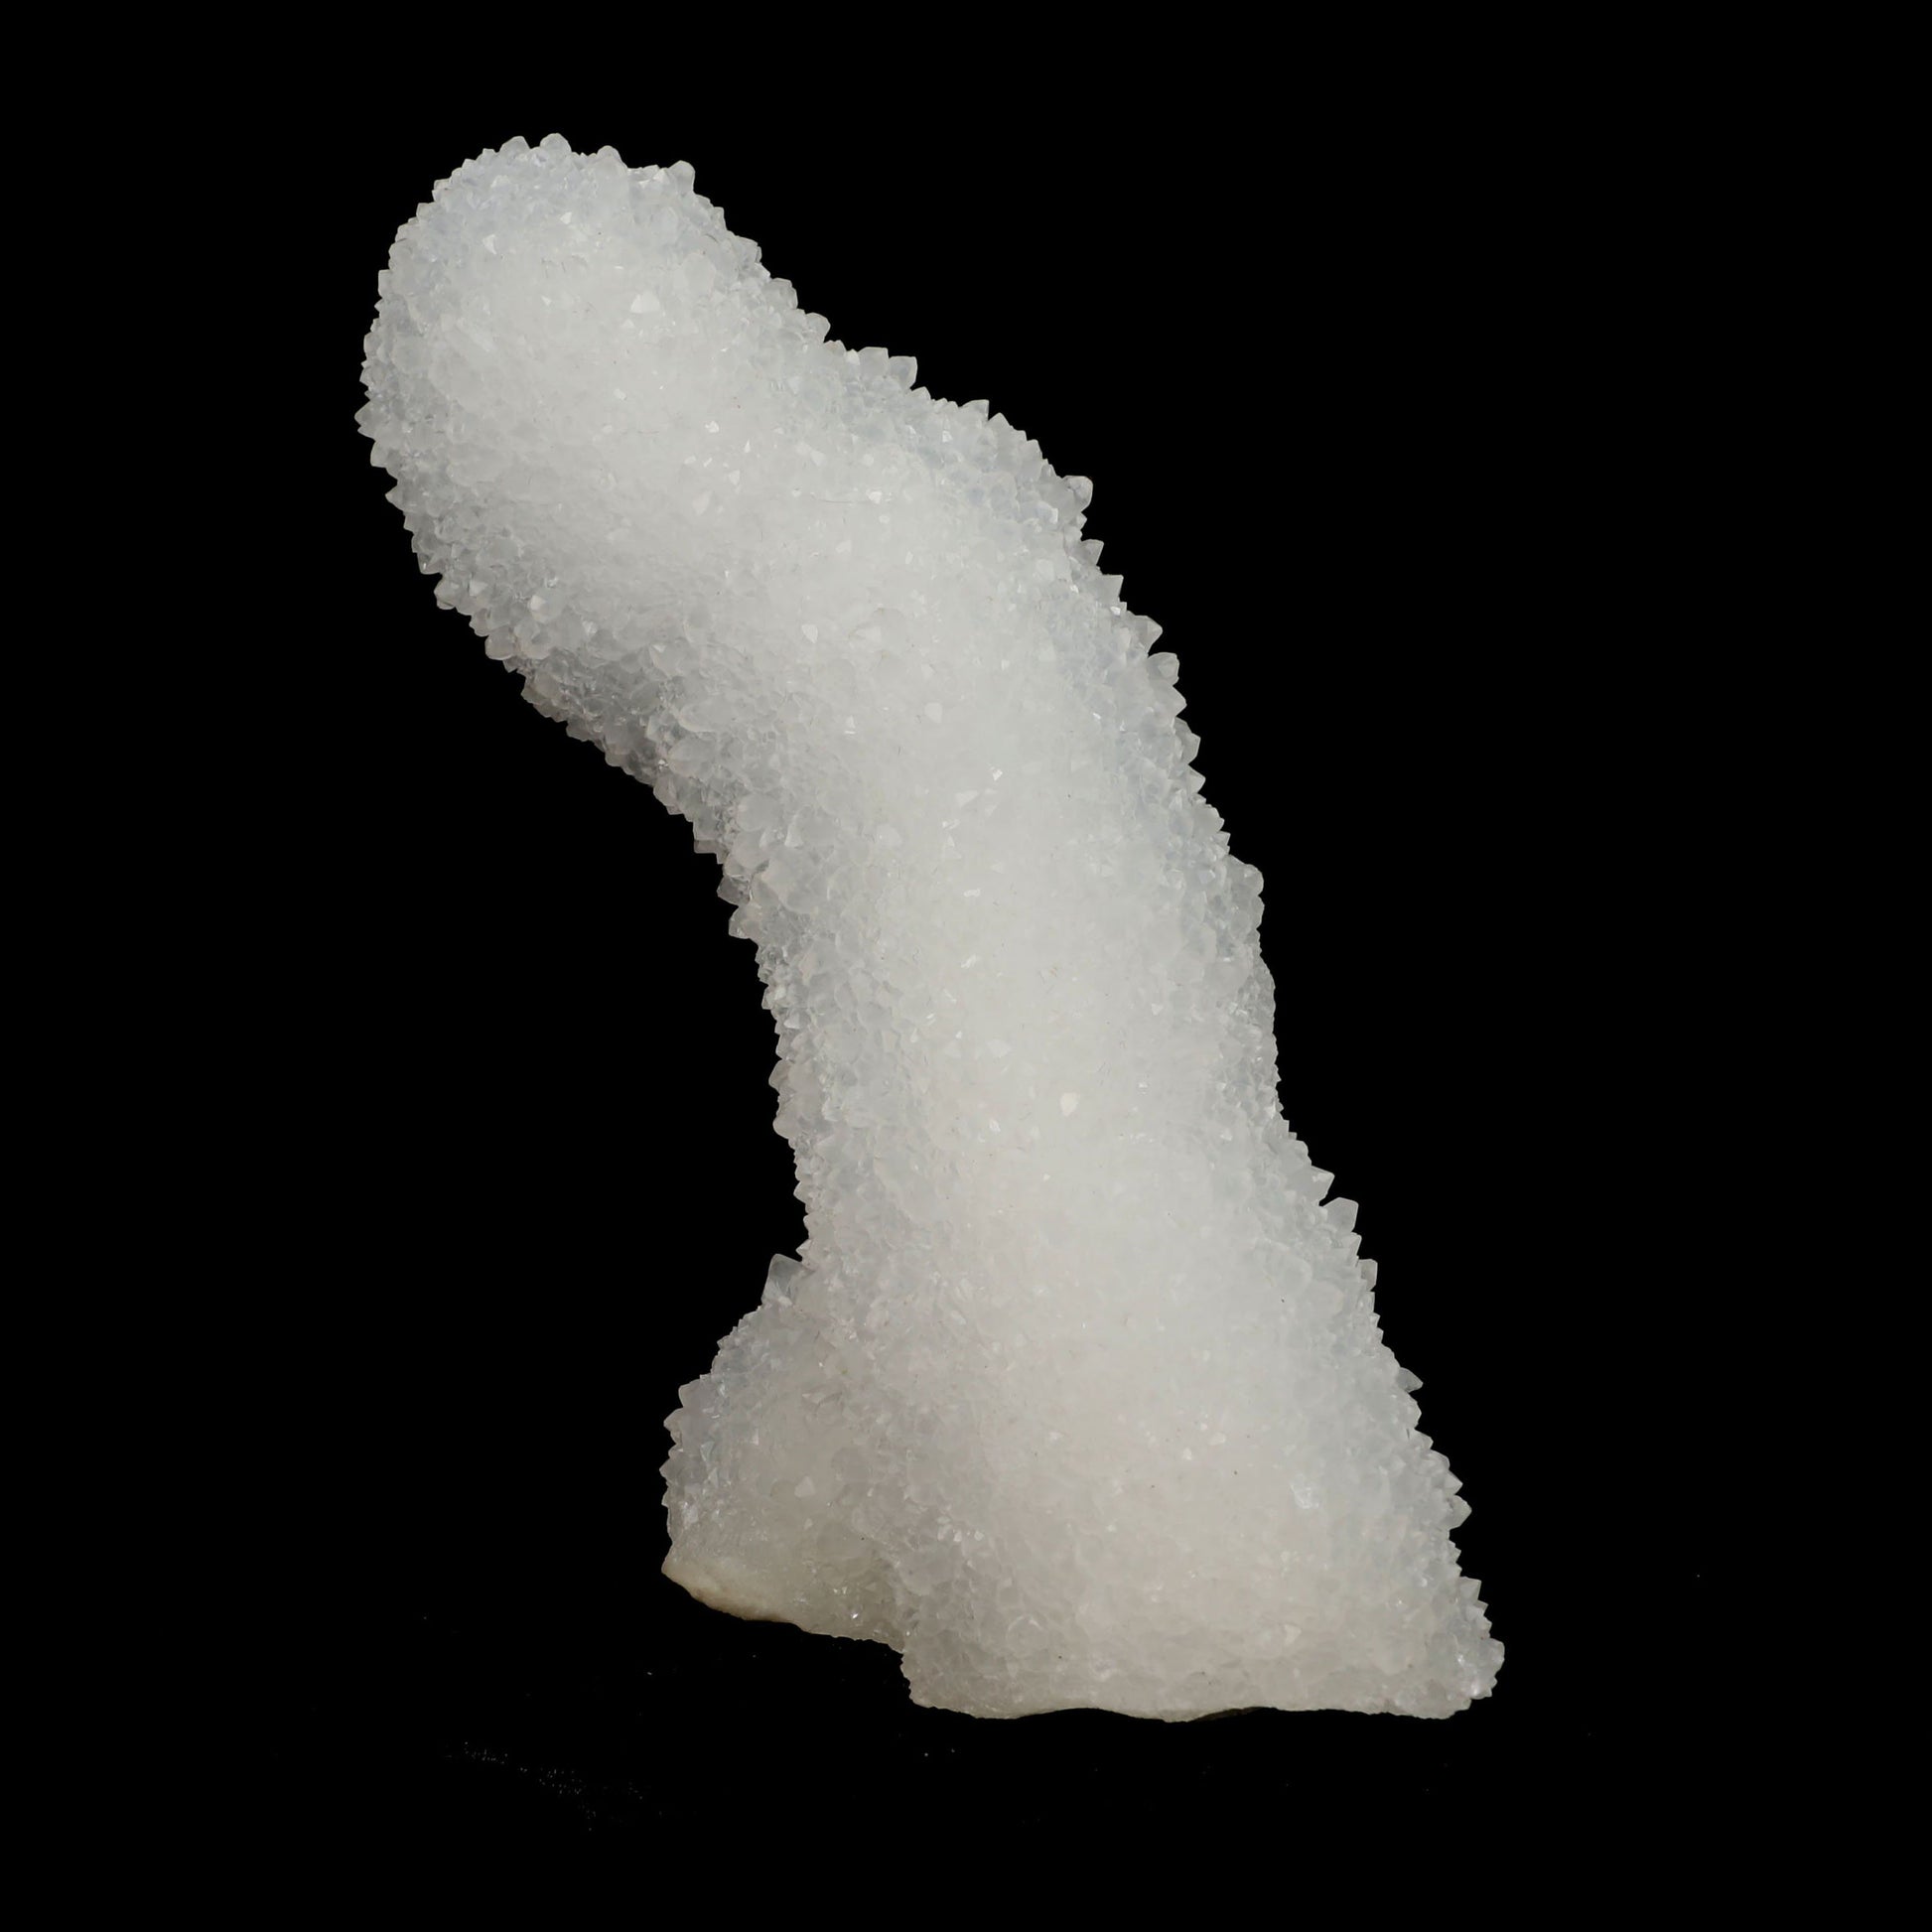 MM Quartz Stalactite Natural Mineral Specimen # B 4938  https://www.superbminerals.us/products/mm-quartz-stalactite-natural-mineral-specimen-b-4938  Features: A very aesthetic specimen of transparent clear&nbsp; Quartz crystals completely covering all sides of a high stalactites as well as two smaller adjoining stalactites, making for great symmetry. A beautiful showy piece in excellent condition. Primary Mineral(s): MM QuartzSecondary